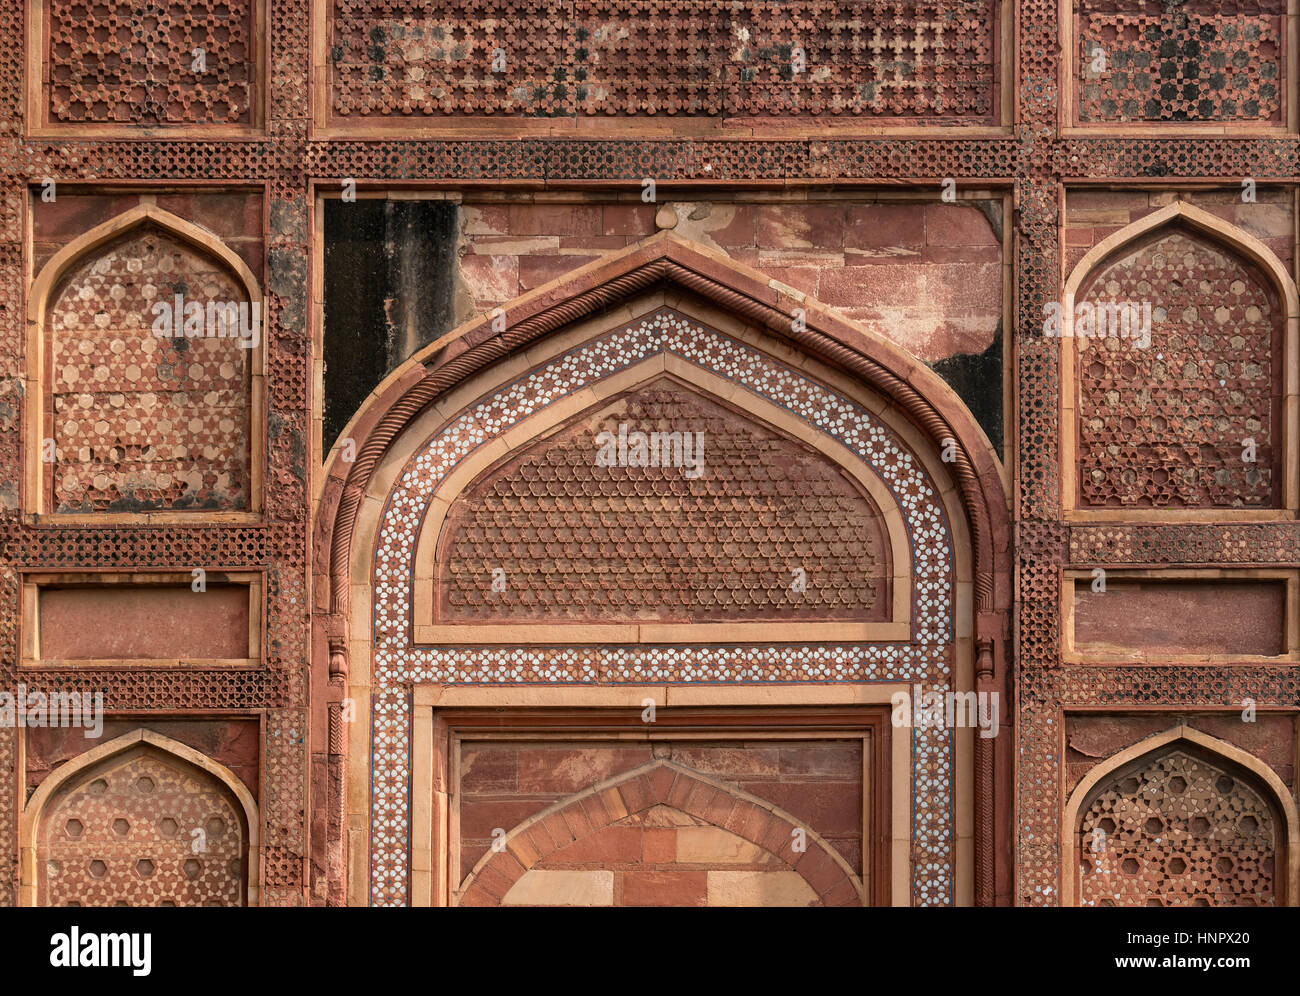 Close-up of geometric designs on the Amar Singh Gate, Agra Fort, India Stock Photo